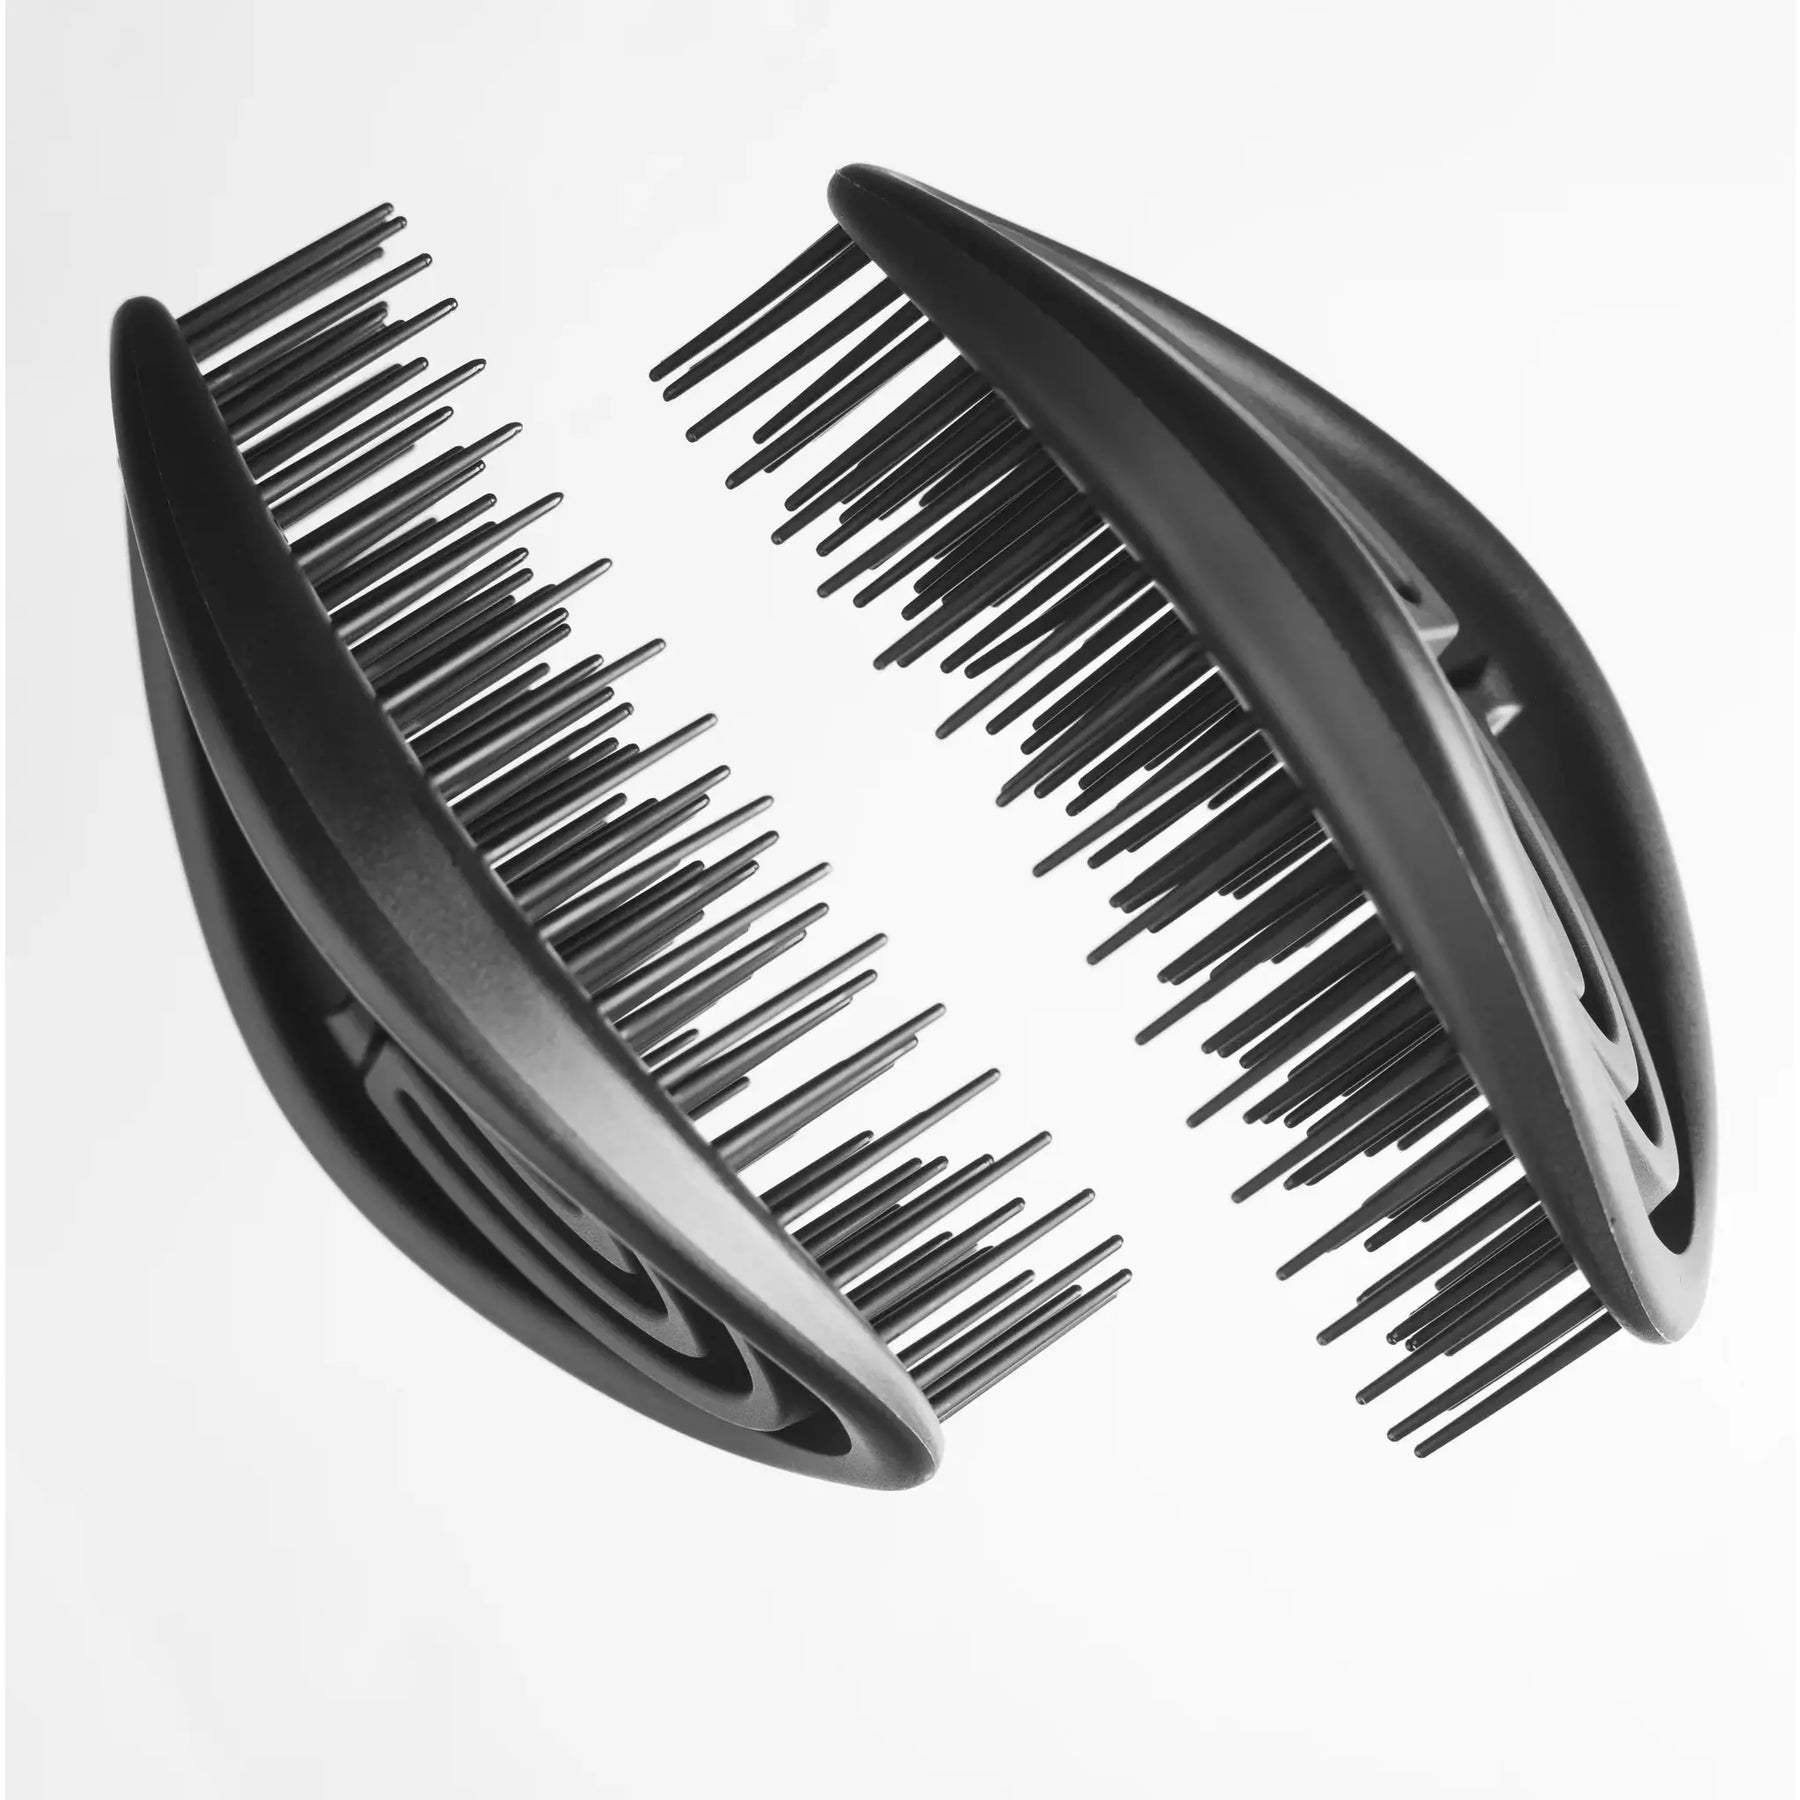 King Hair and Beauty: The Gem Hairbrush in Black - Wardrobe Plus